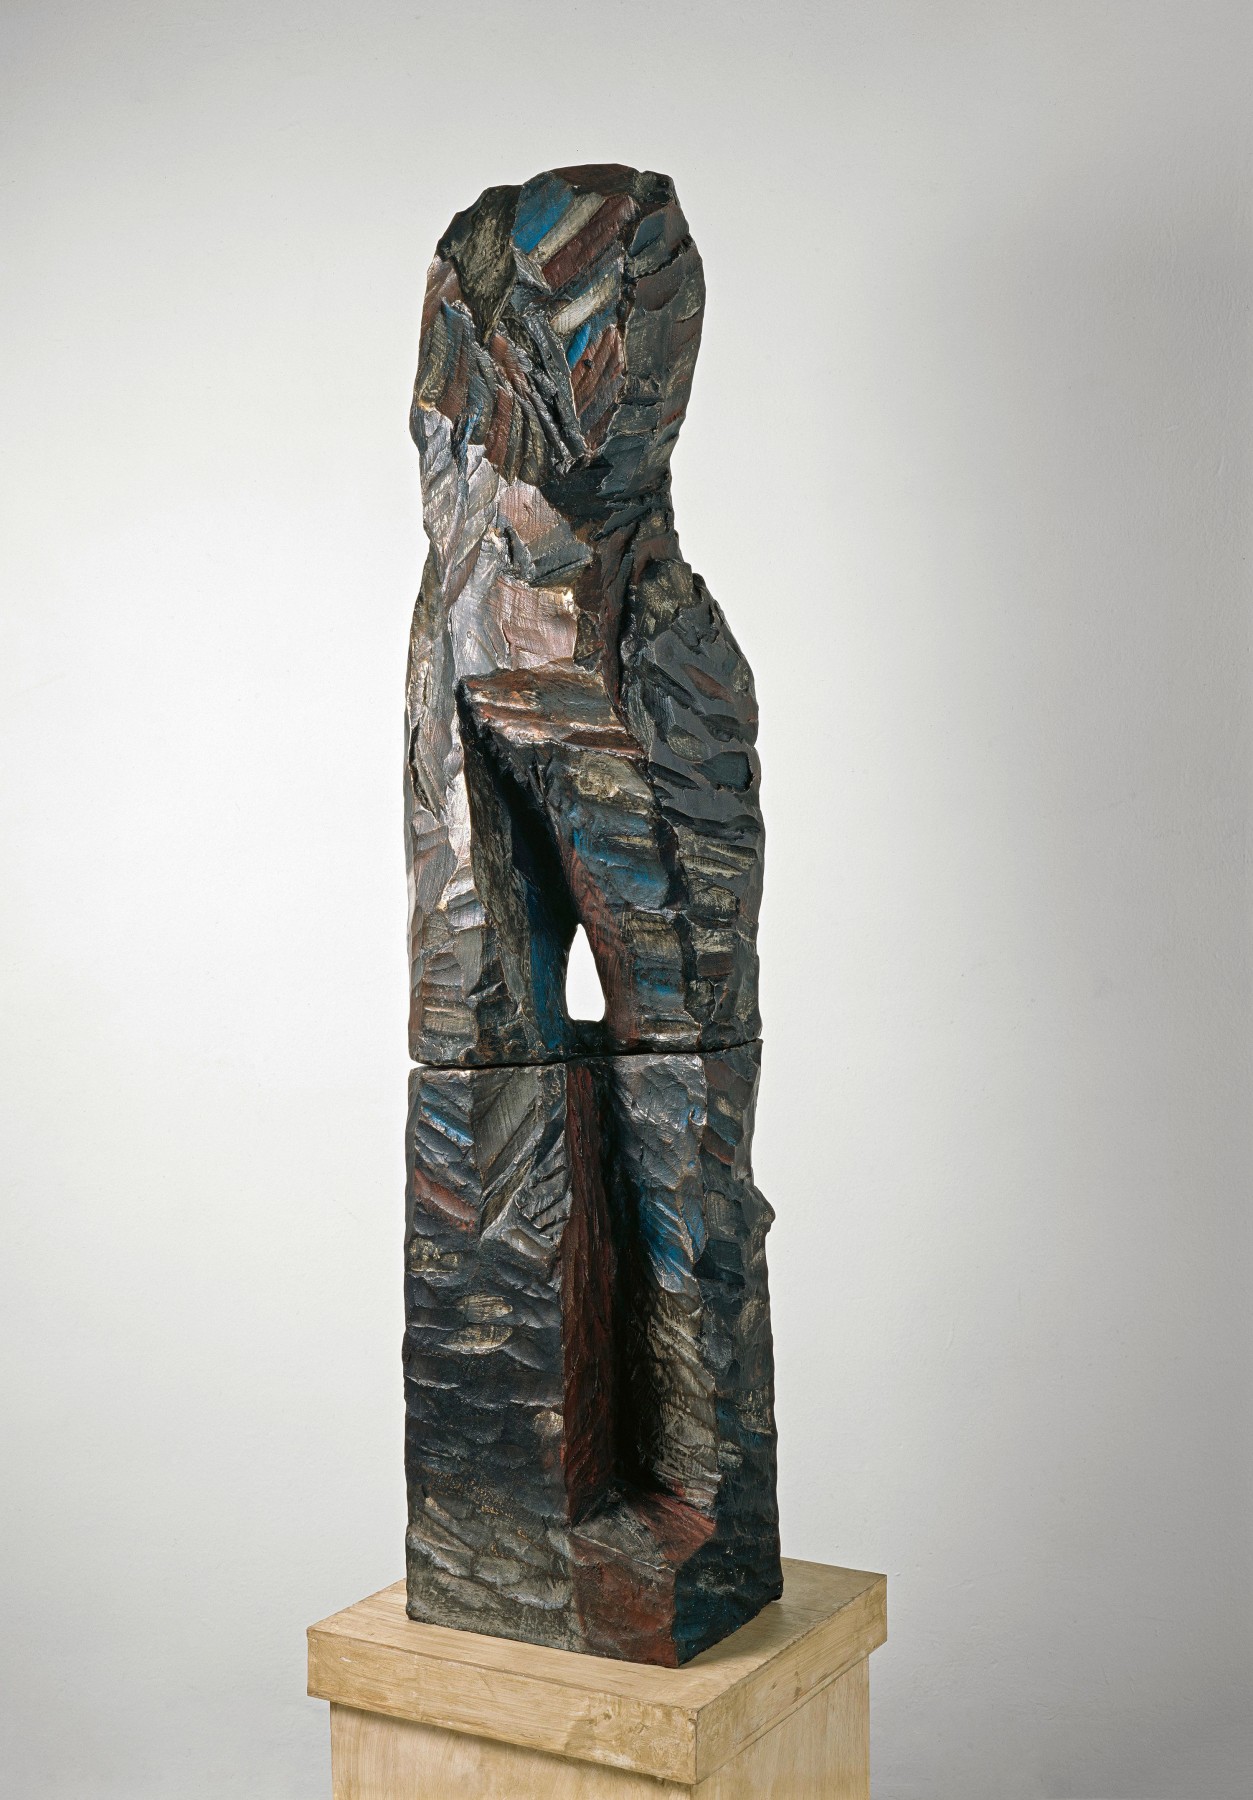 &quot;Nymph&quot;, 1981 Painted bronze, from an edition of 3